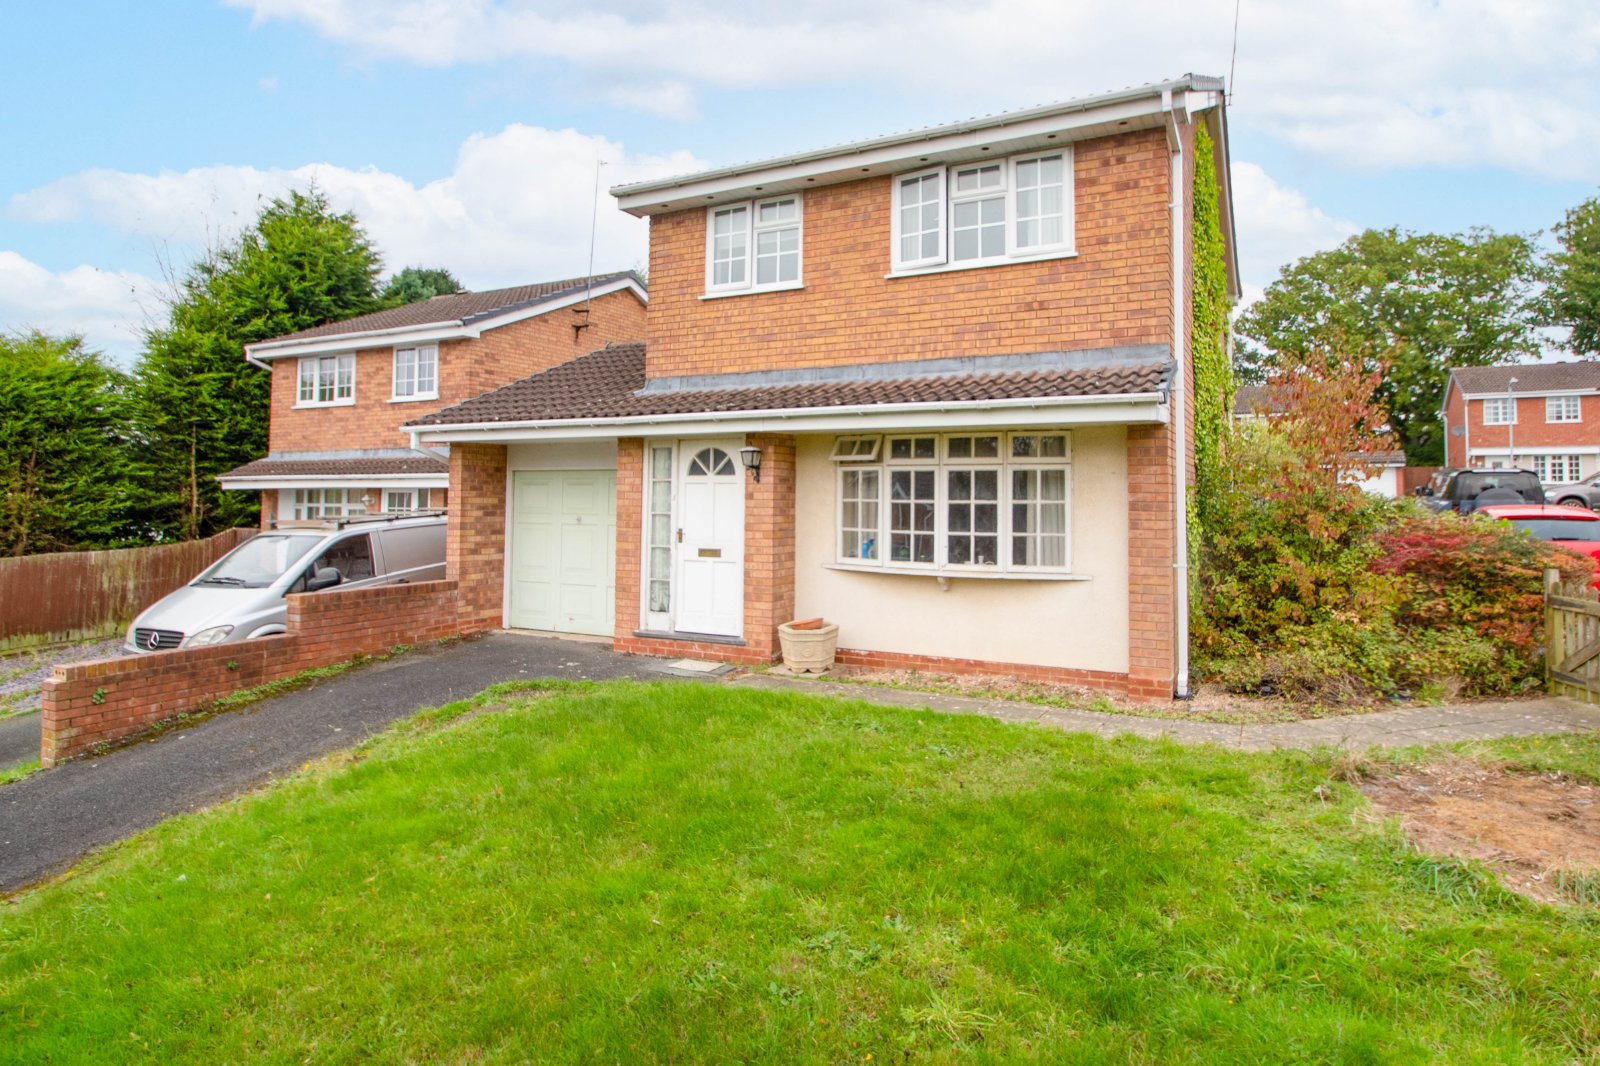 3 bed house for sale in Neighbrook Close, Webheath  - Property Image 1